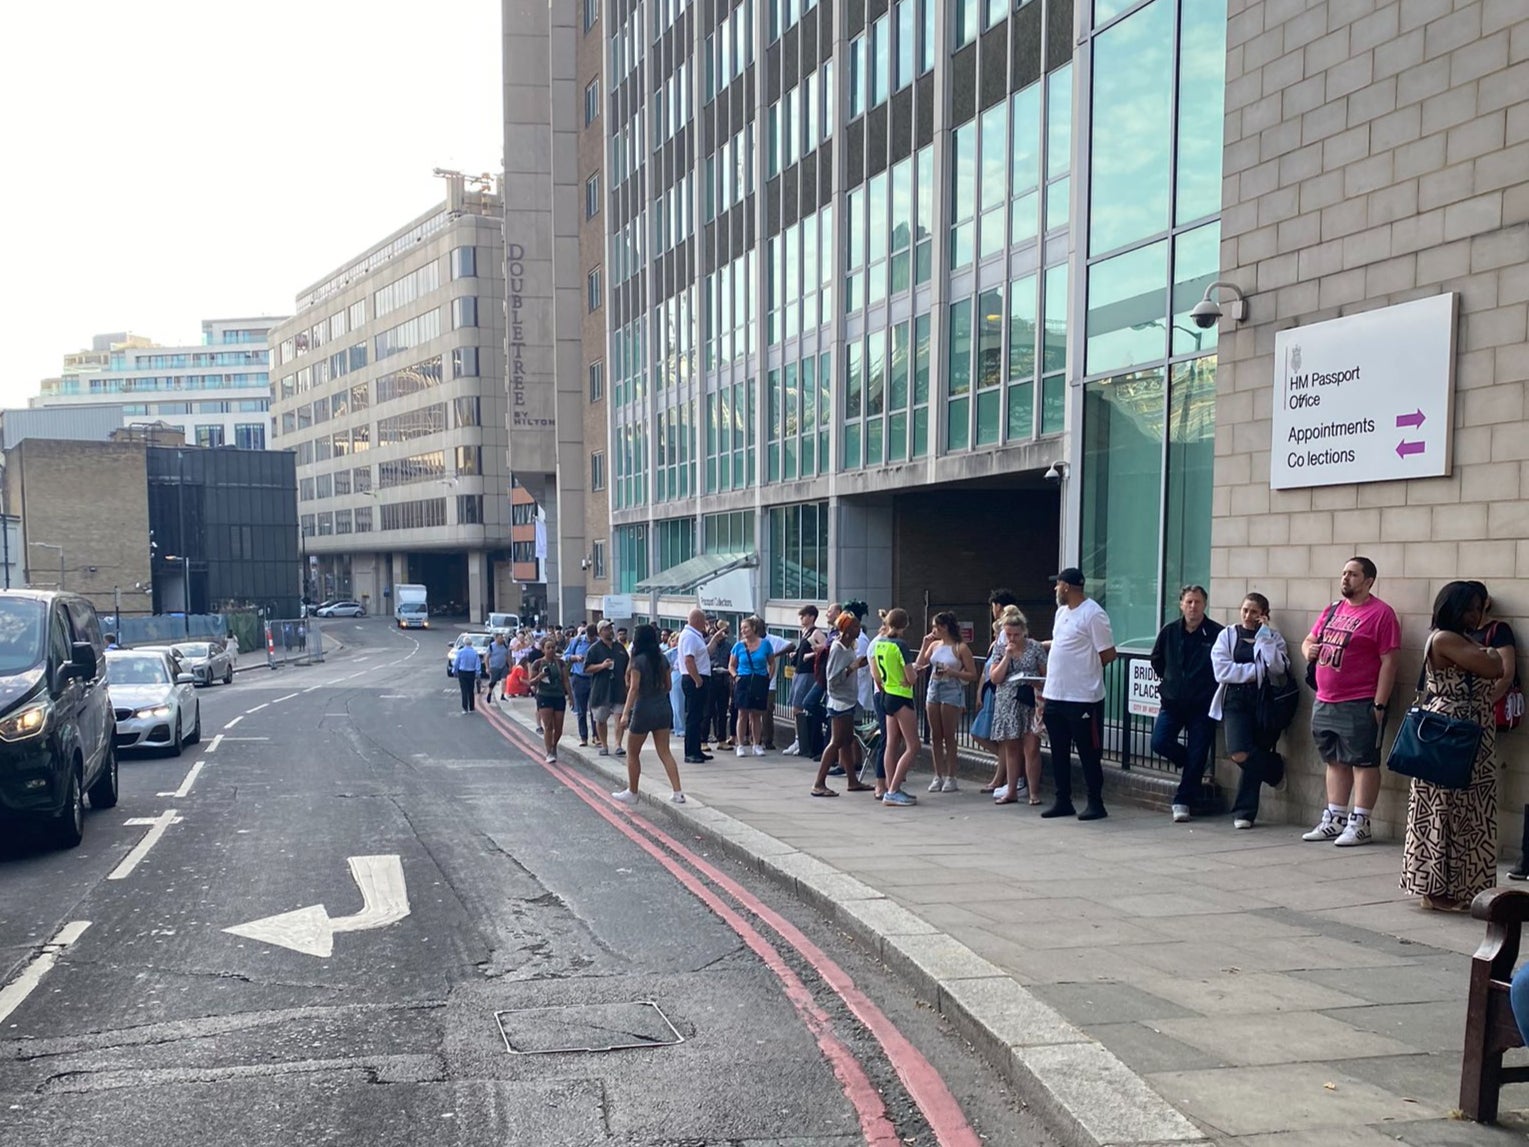 The scenes at HM Passport Office on Monday morning were described as ‘chaotic’